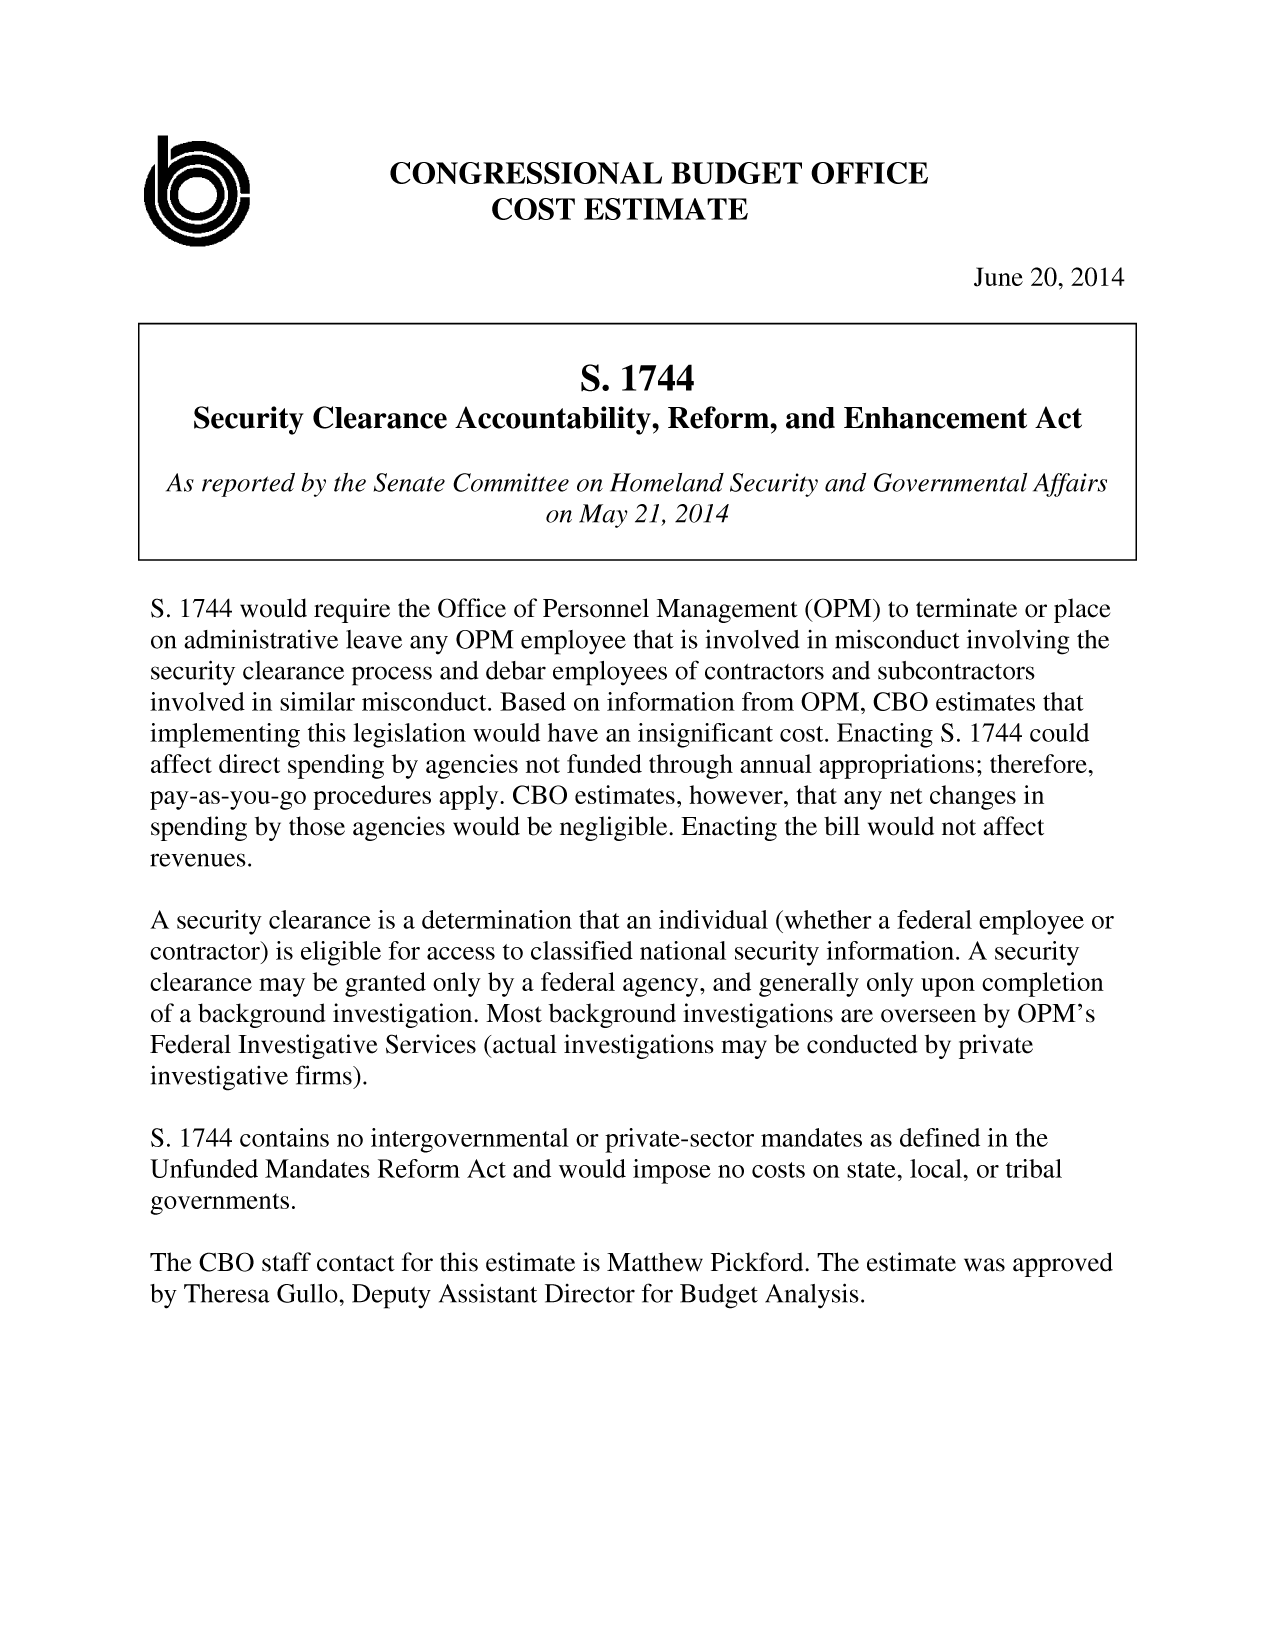 handle is hein.congrec/cbo1735 and id is 1 raw text is: CONGRESSIONAL BUDGET OFFICE
COST ESTIMATE
June 20, 2014
S. 1744
Security Clearance Accountability, Reform, and Enhancement Act
As reported by the Senate Committee on Homeland Security and Governmental Affairs
on May 21, 2014
S. 1744 would require the Office of Personnel Management (OPM) to terminate or place
on administrative leave any OPM employee that is involved in misconduct involving the
security clearance process and debar employees of contractors and subcontractors
involved in similar misconduct. Based on information from OPM, CBO estimates that
implementing this legislation would have an insignificant cost. Enacting S. 1744 could
affect direct spending by agencies not funded through annual appropriations; therefore,
pay-as-you-go procedures apply. CBO estimates, however, that any net changes in
spending by those agencies would be negligible. Enacting the bill would not affect
revenues.
A security clearance is a determination that an individual (whether a federal employee or
contractor) is eligible for access to classified national security information. A security
clearance may be granted only by a federal agency, and generally only upon completion
of a background investigation. Most background investigations are overseen by OPM's
Federal Investigative Services (actual investigations may be conducted by private
investigative firms).
S. 1744 contains no intergovernmental or private-sector mandates as defined in the
Unfunded Mandates Reform Act and would impose no costs on state, local, or tribal
governments.
The CBO staff contact for this estimate is Matthew Pickford. The estimate was approved
by Theresa Gullo, Deputy Assistant Director for Budget Analysis.


